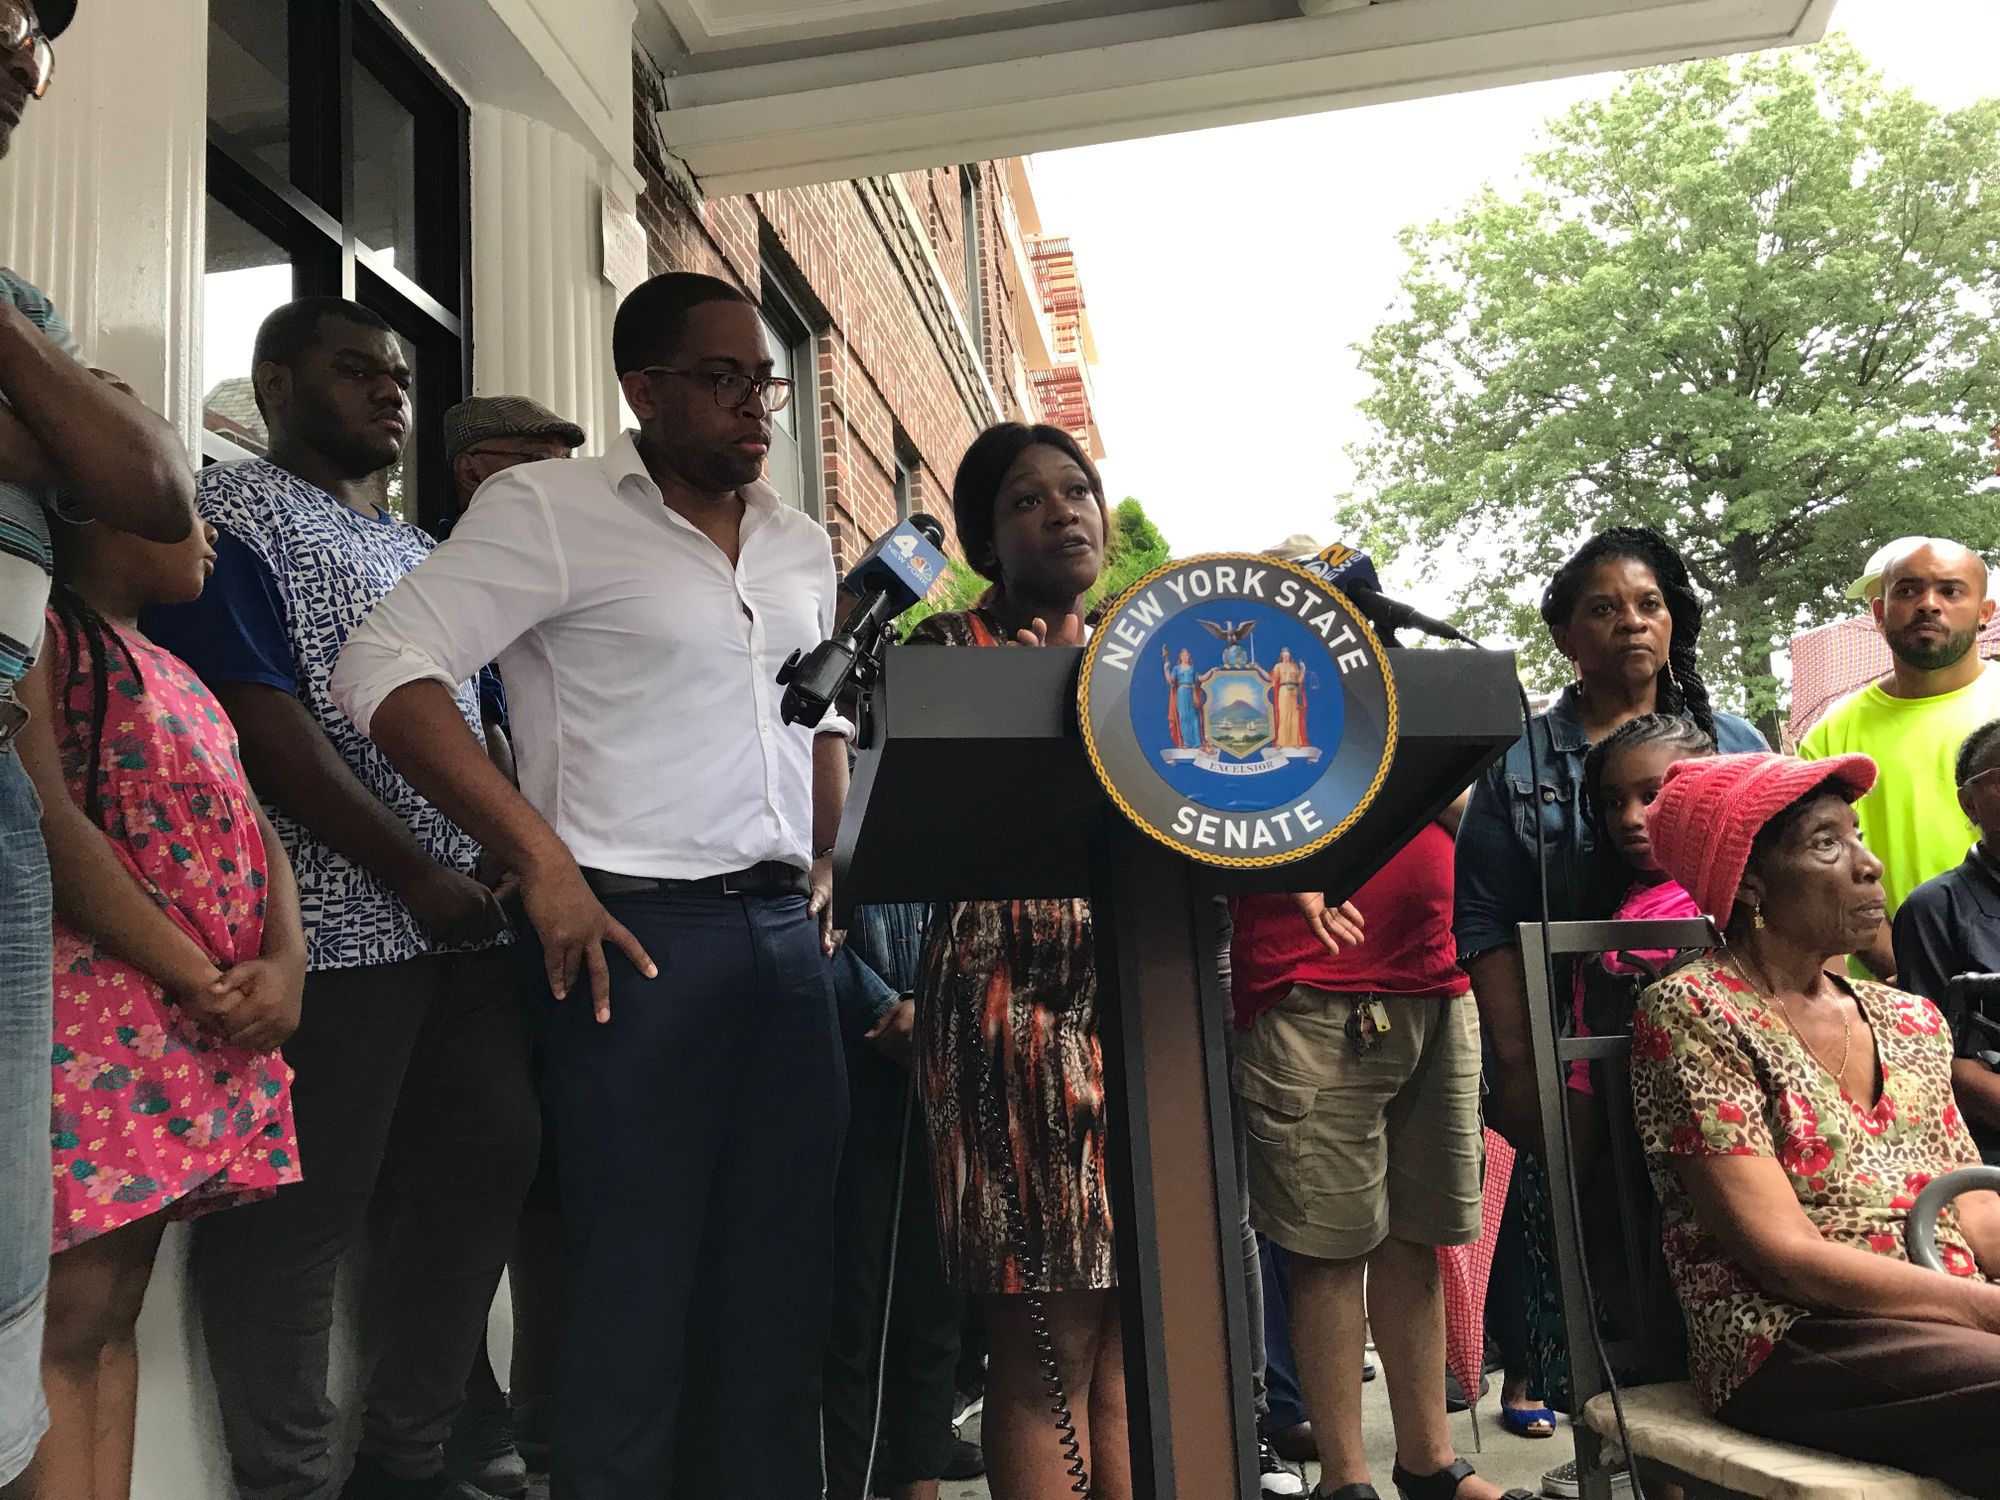 Power Not Fully Back on Prospect Lefferts Gardens Block, Residents and Pols Say